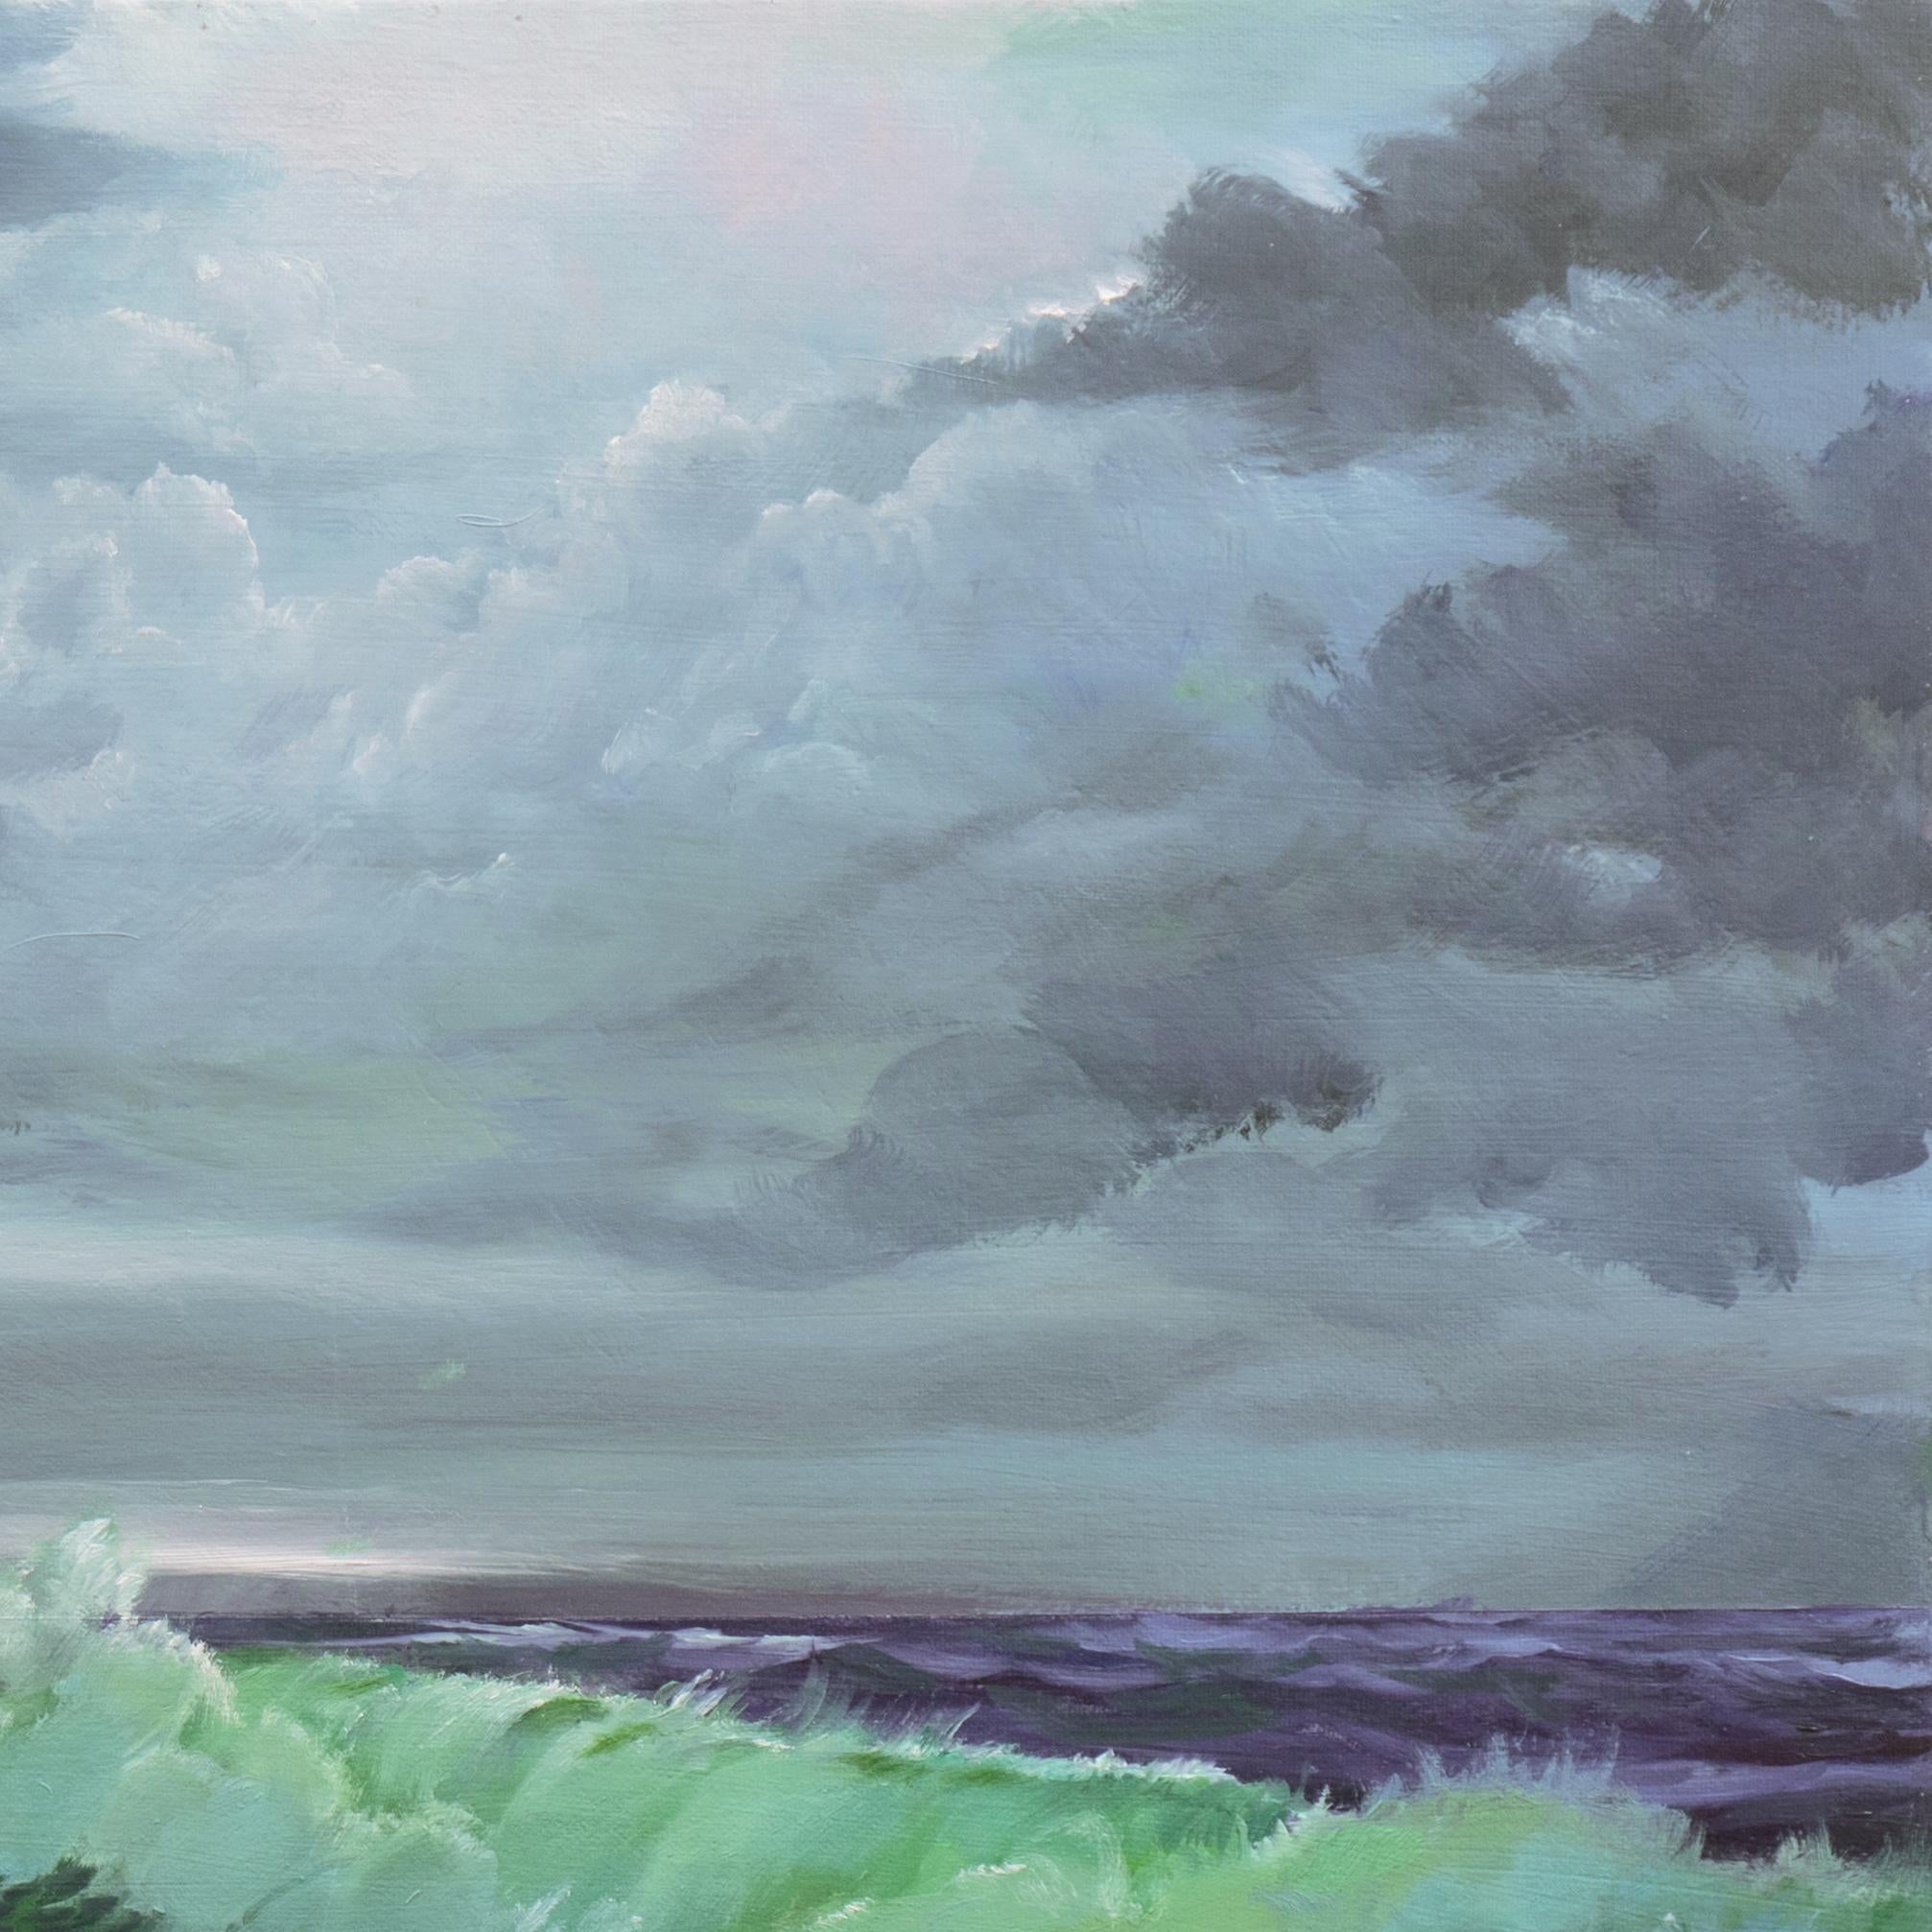 'After the Storm', Turbulent Seascape - Impressionist Painting by Roy Rose Sales